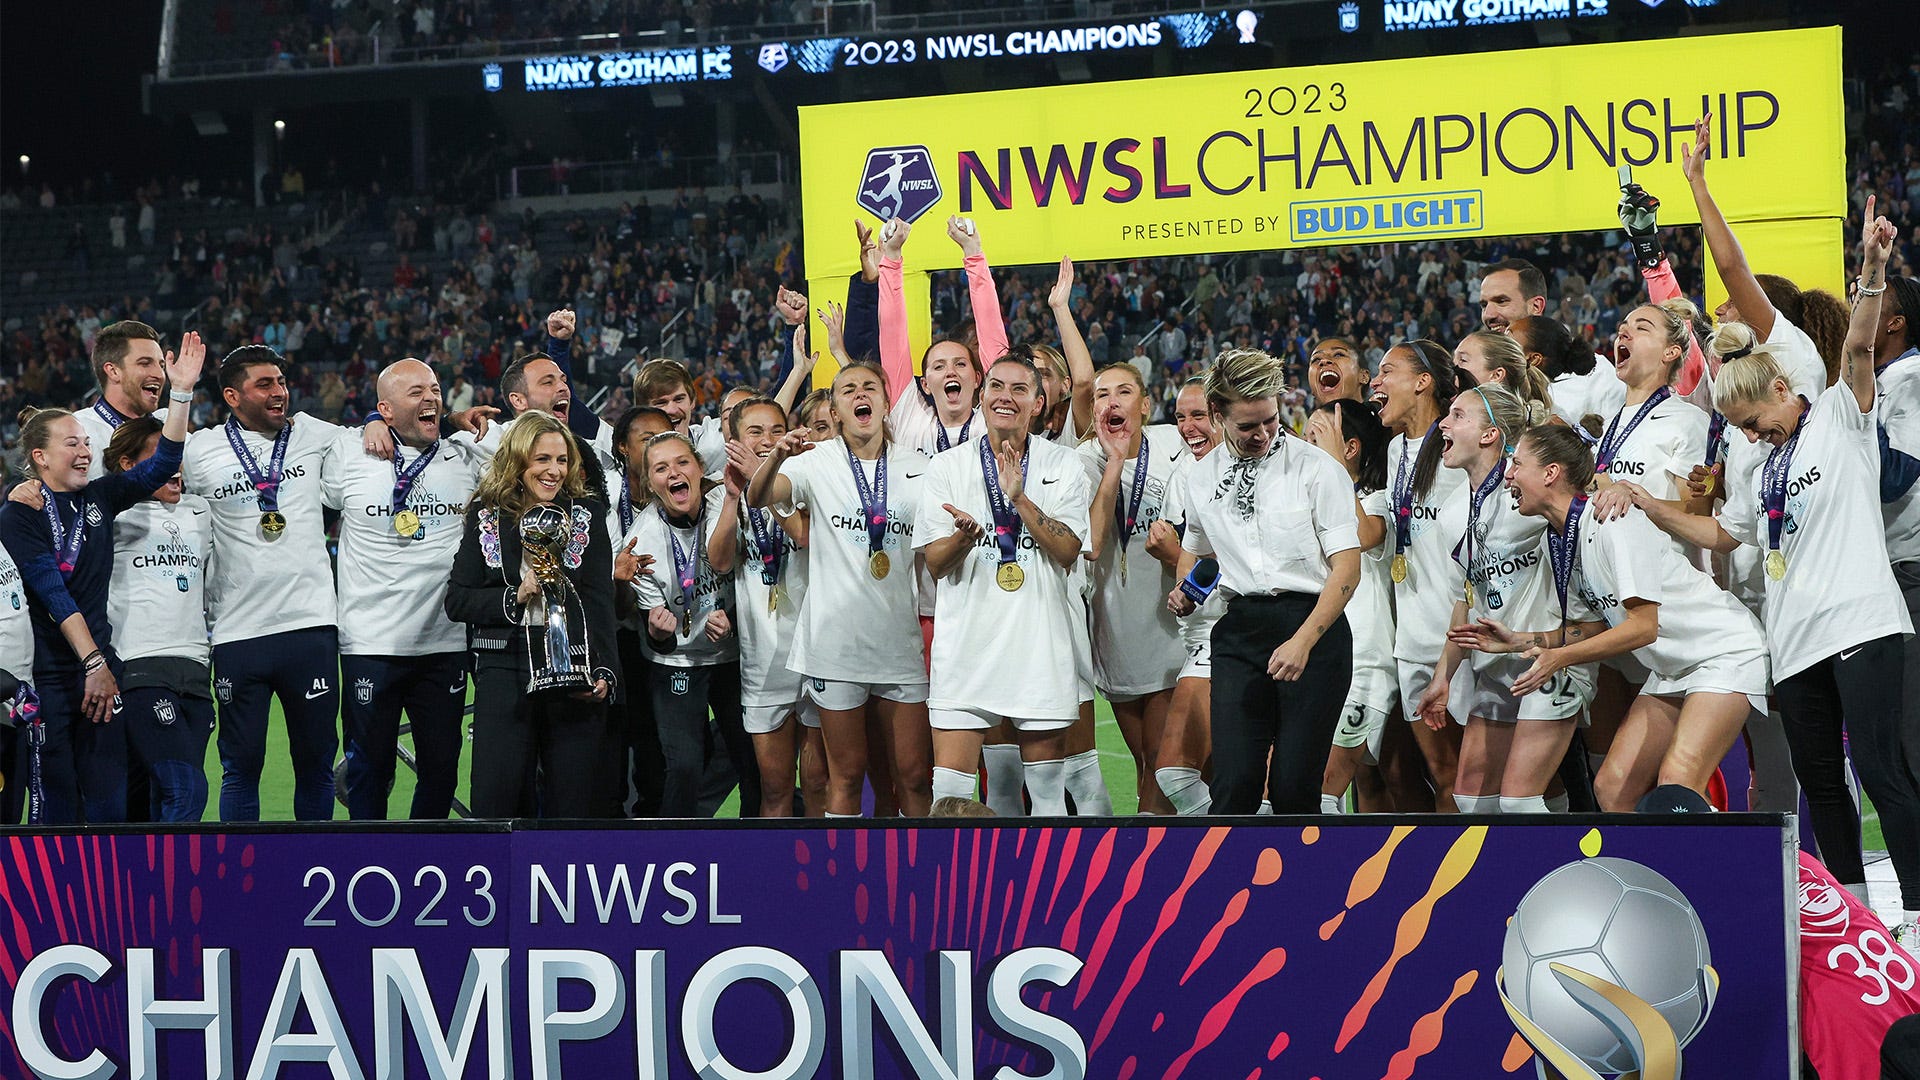 Where to Watch 2023 NWSL Championship: Streaming & TV Schedule